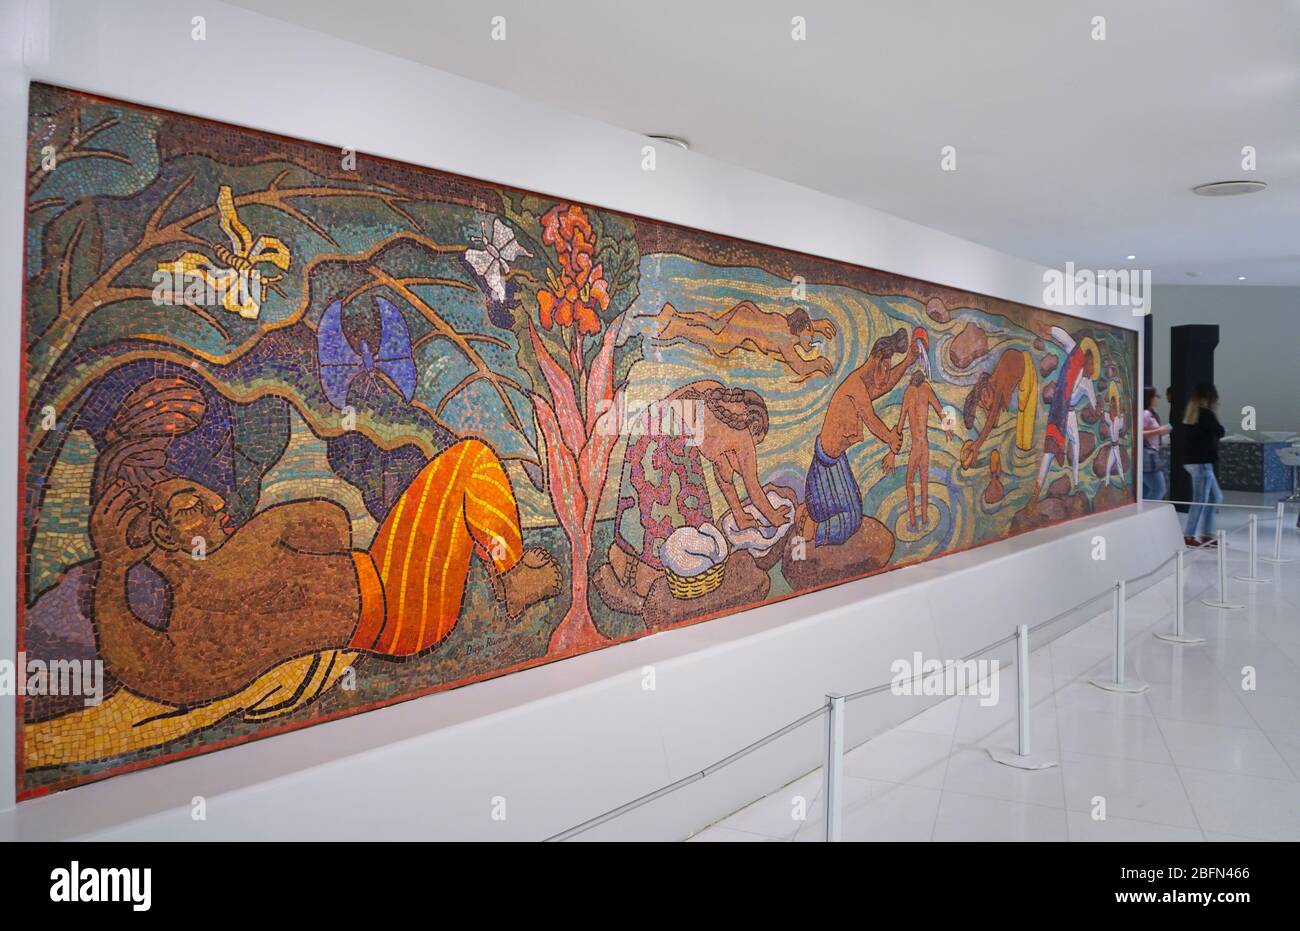 Diego Rivera mosaic, Bath in the River' or 'Juchitan River' or 'Bath of Tehuantepec', in the Soumaya Museum in Mexico City, Mexico. Stock Photo